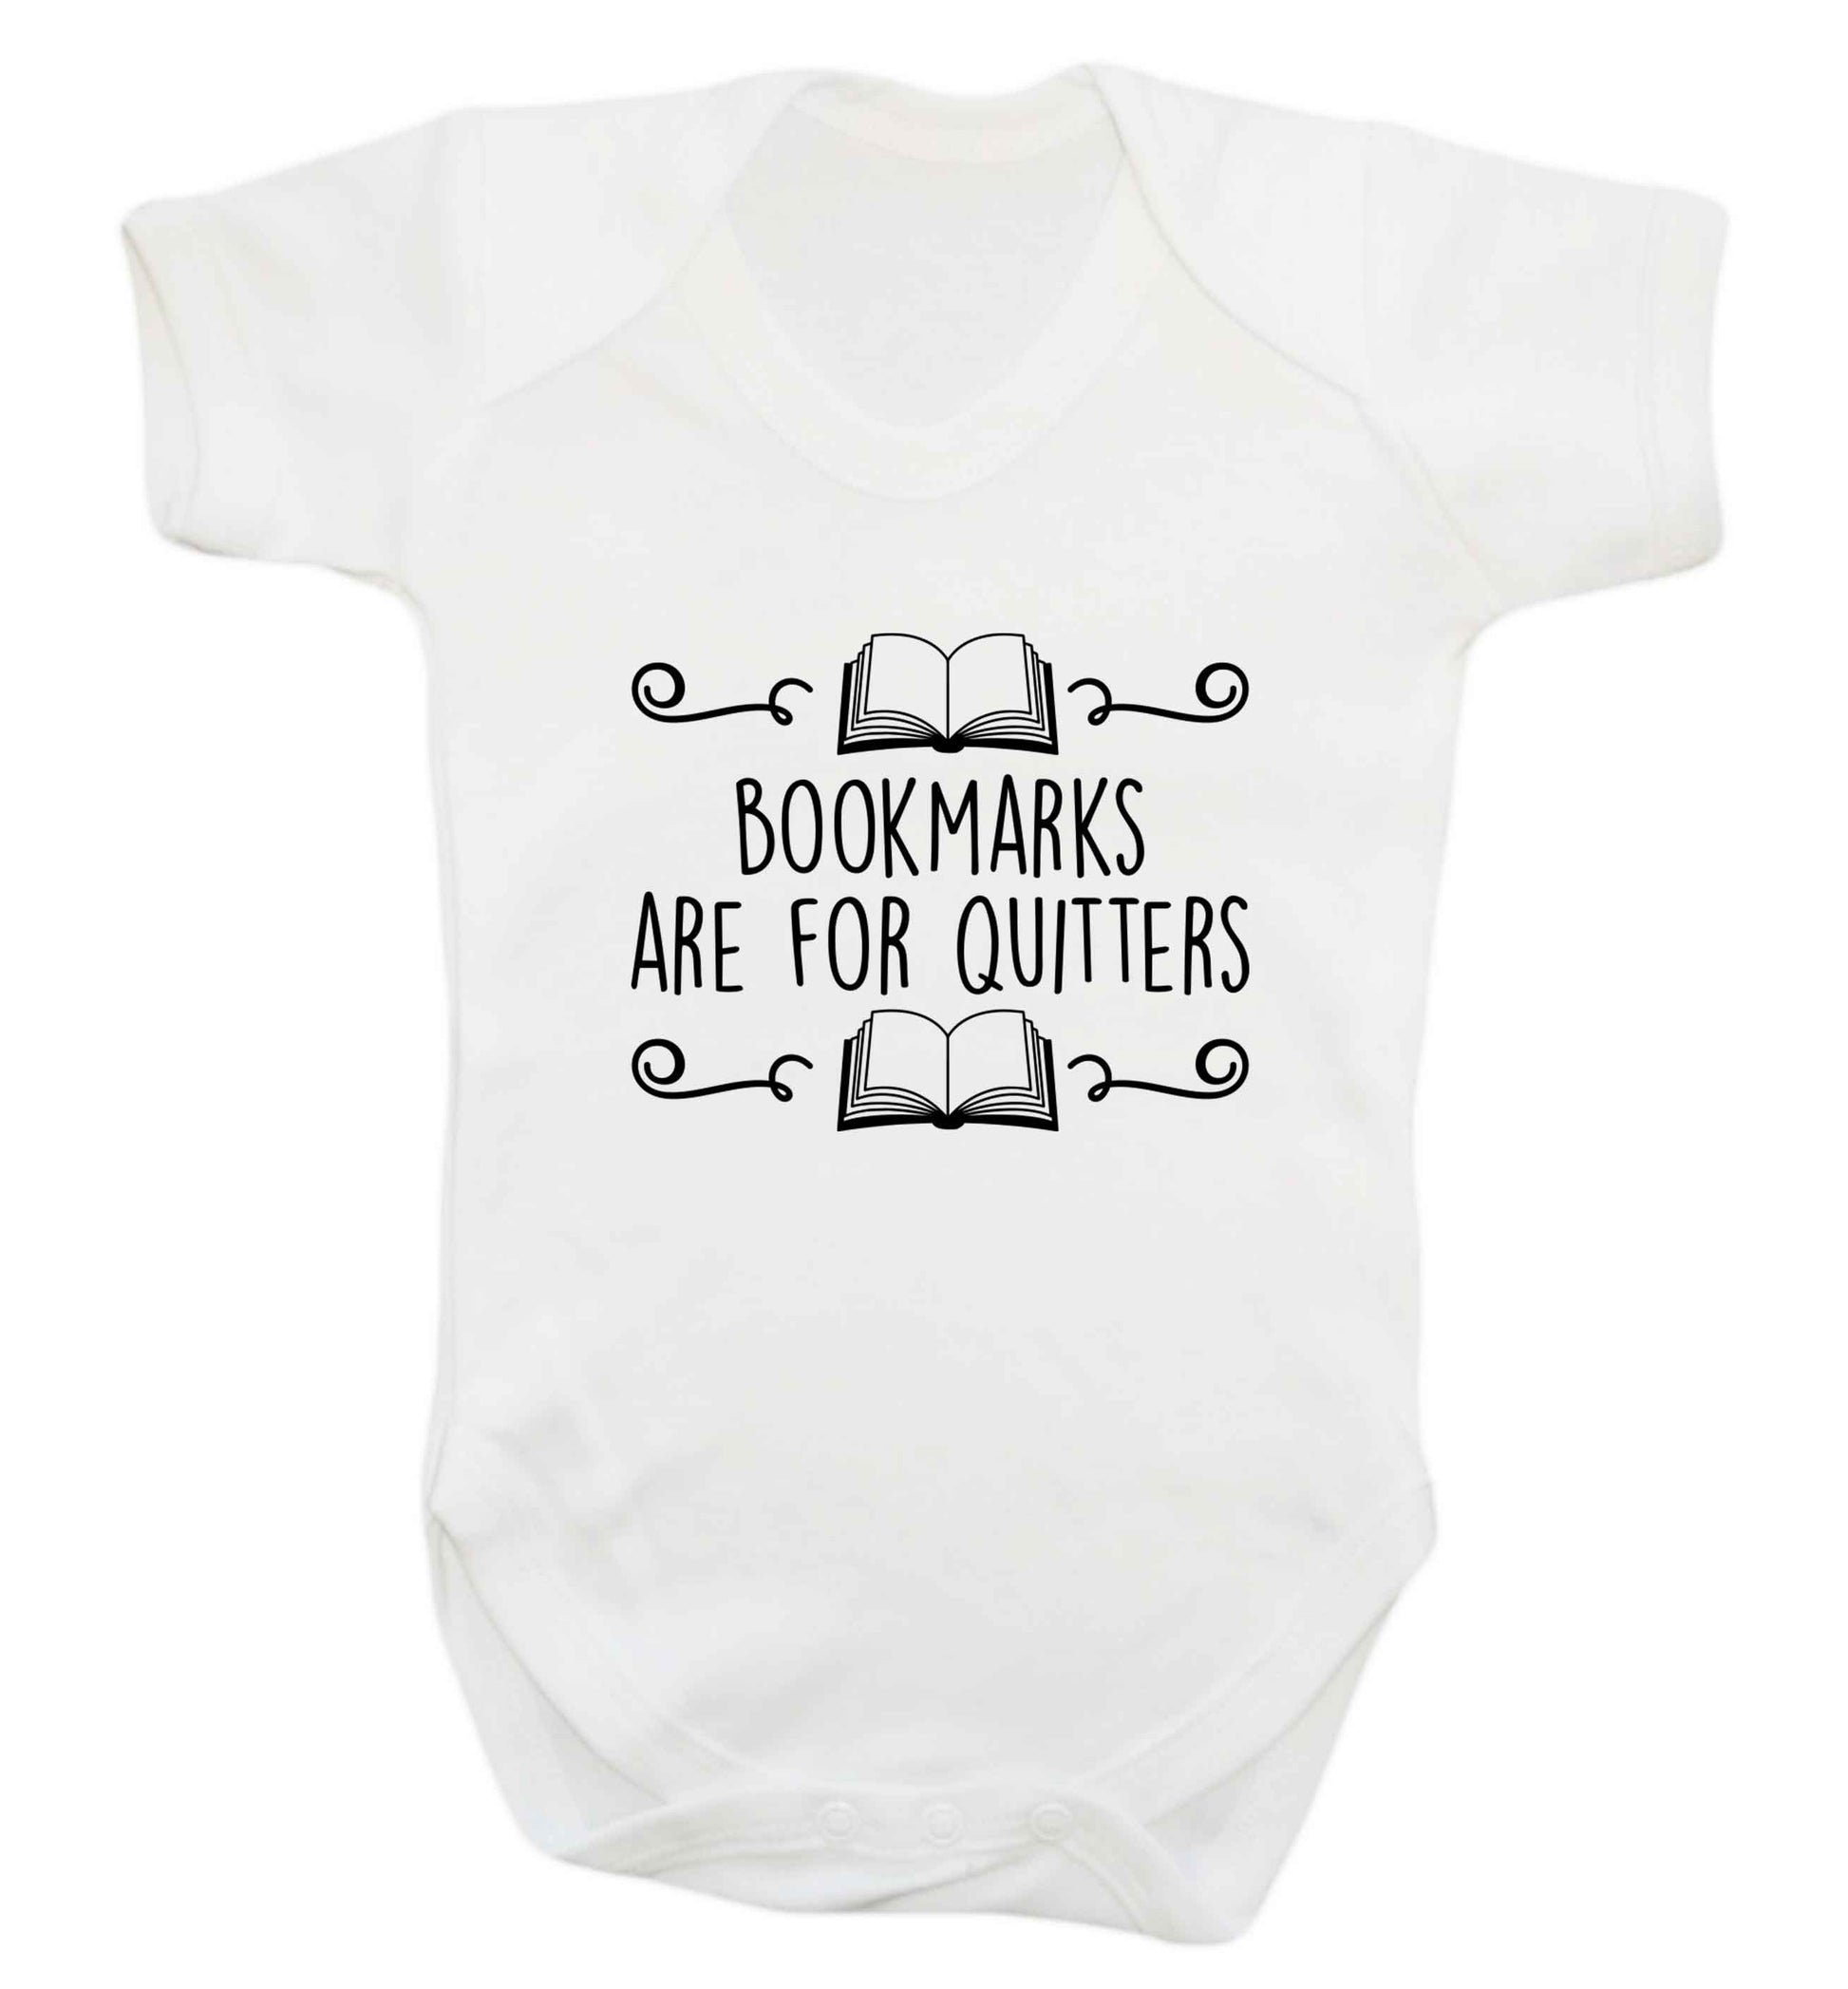 Bookmarks are for quitters baby vest white 18-24 months